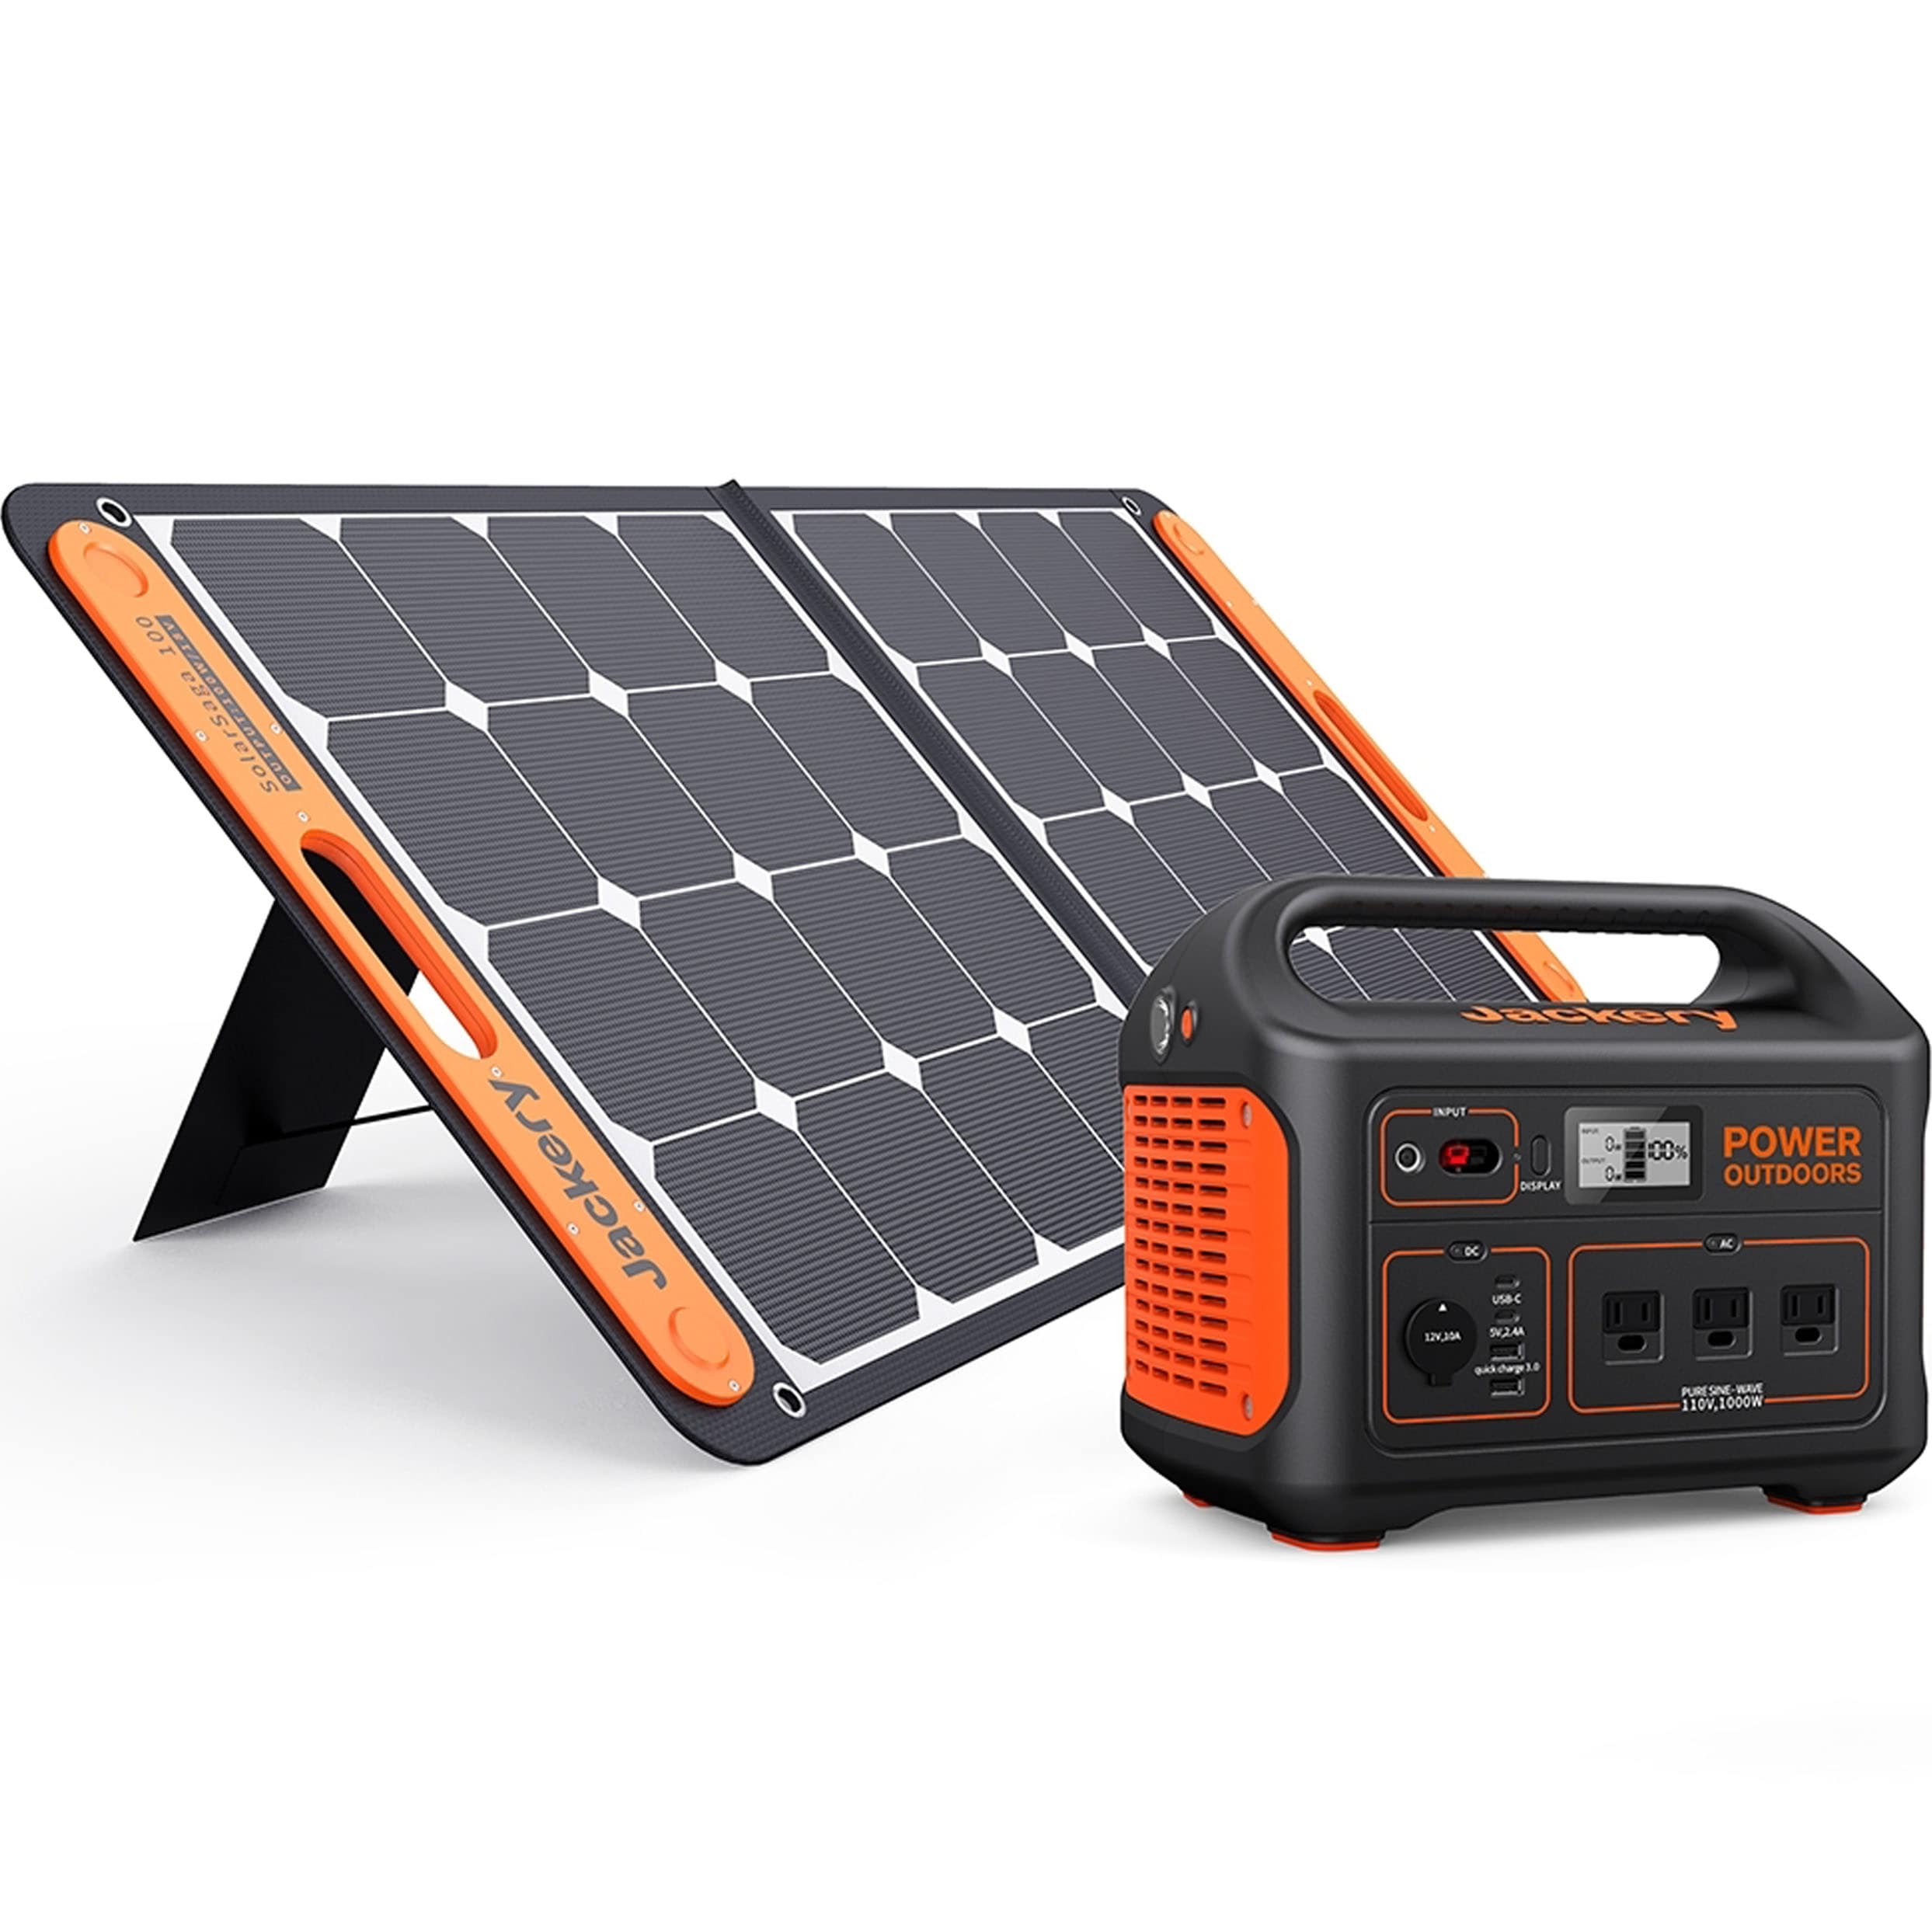 Portable Solar Generator with Solar Panel,Included 3 Sets LED lights,Solar Power Inverter,Electric Generator,Small Basic Portable Generator Kit,Solar Lights for Home & Camping,Power for Solar Fans 